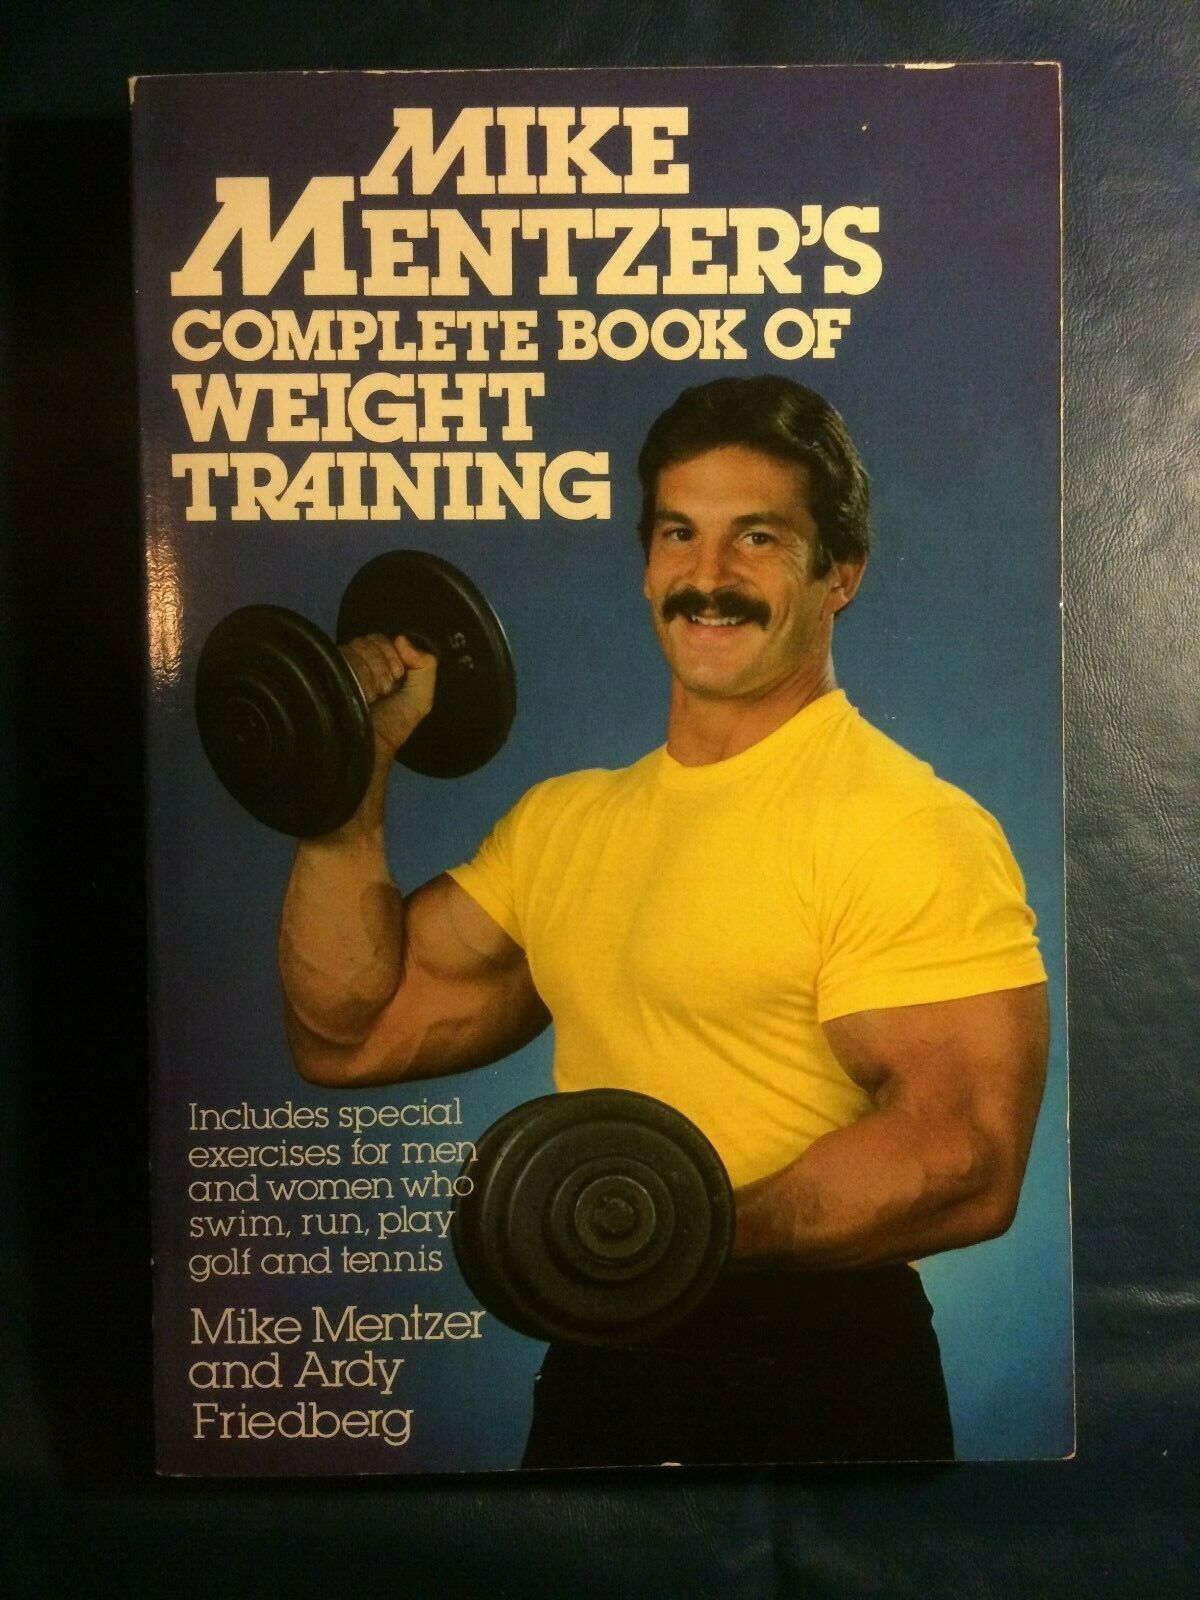 Mike Mentzer's Complete Book of Weight Training by Ardy Friedberg and Mike Mentzer ( Trade Paperback) online